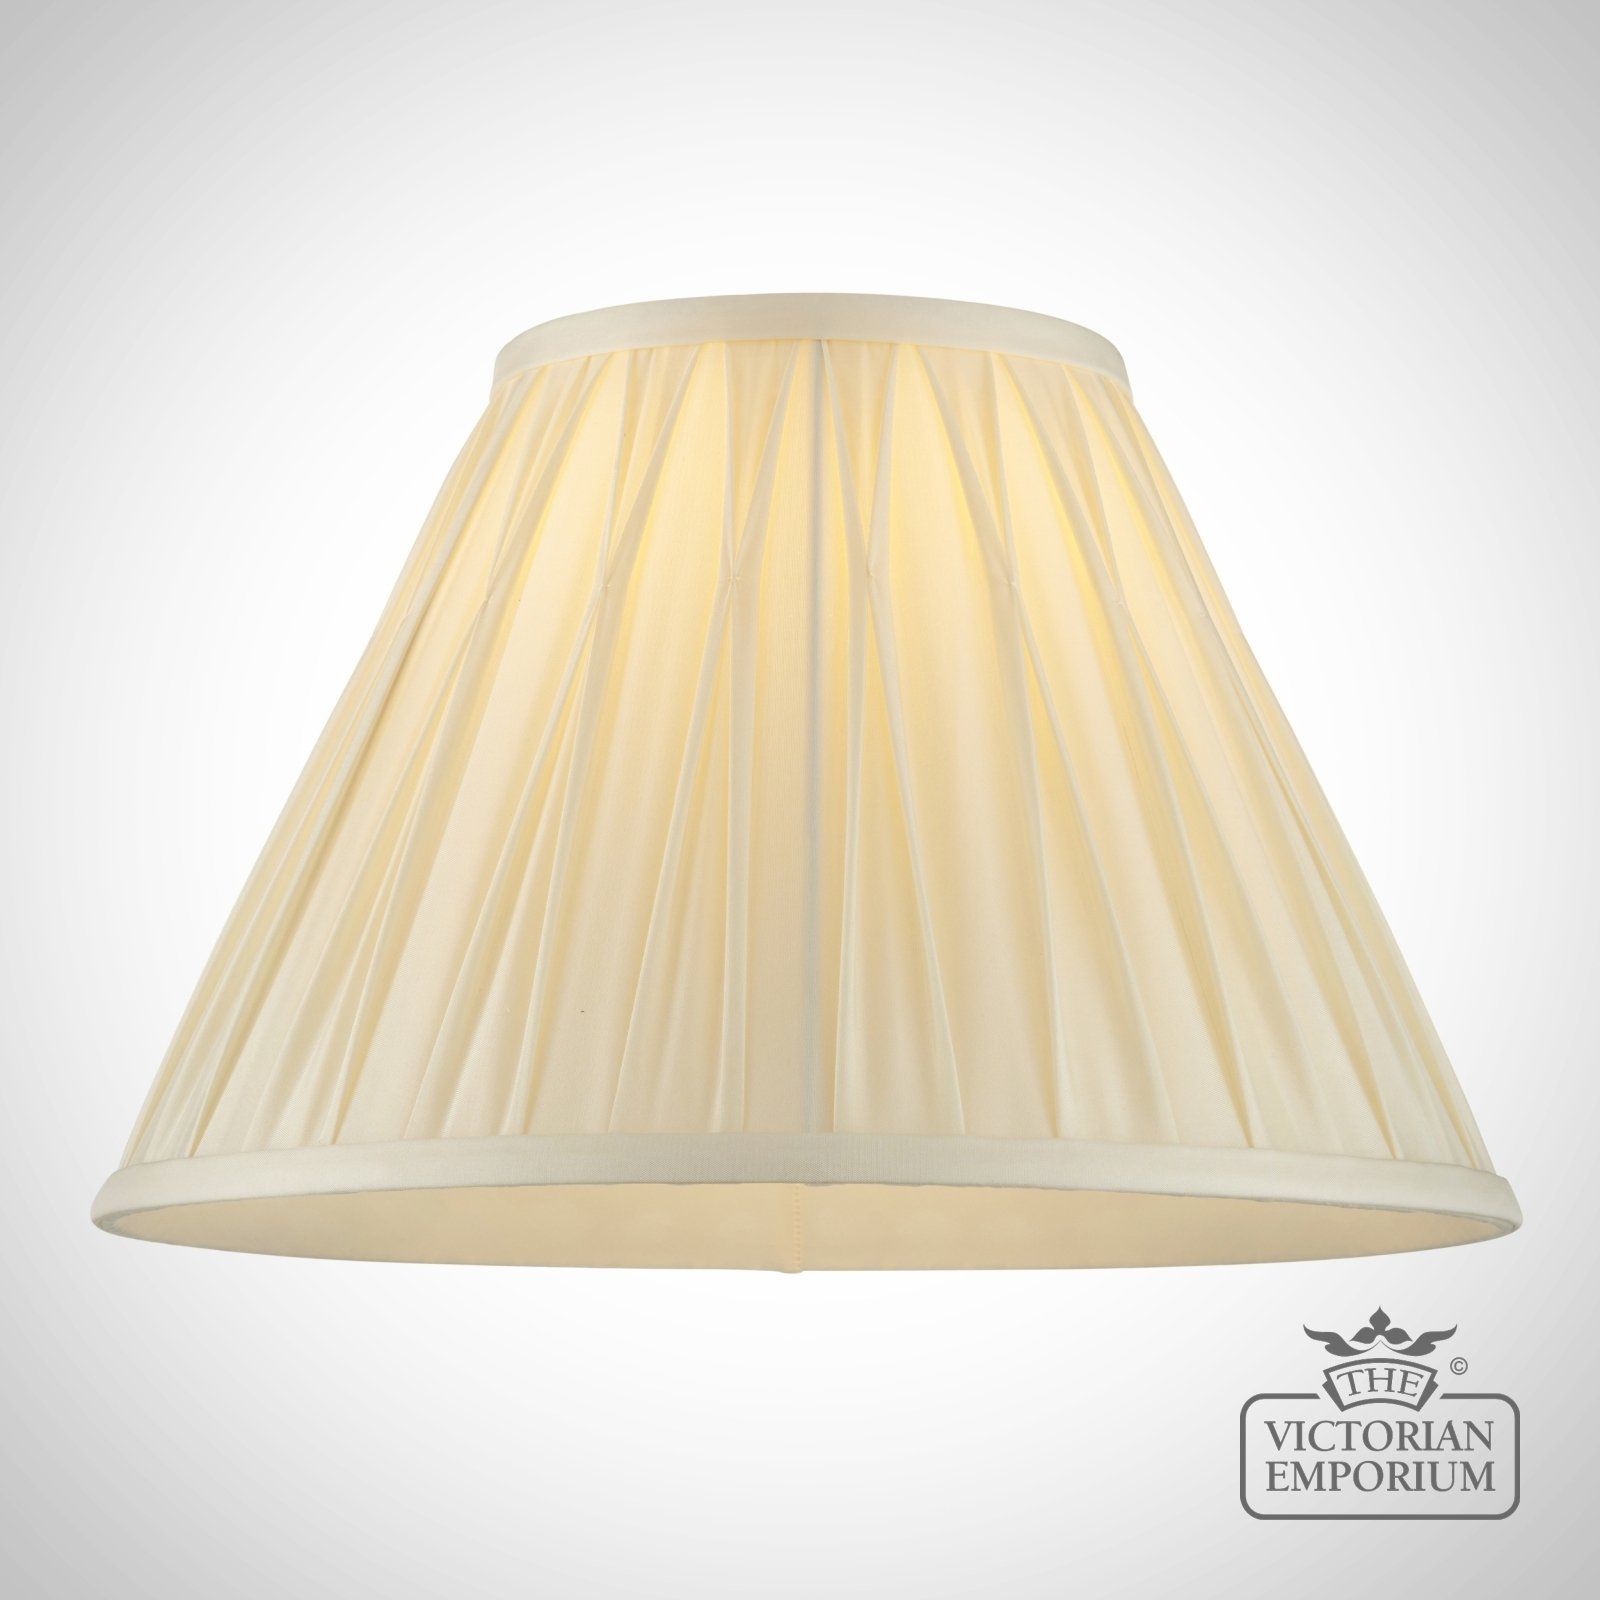 Chatsworth Ivory Shade in a choice of sizes